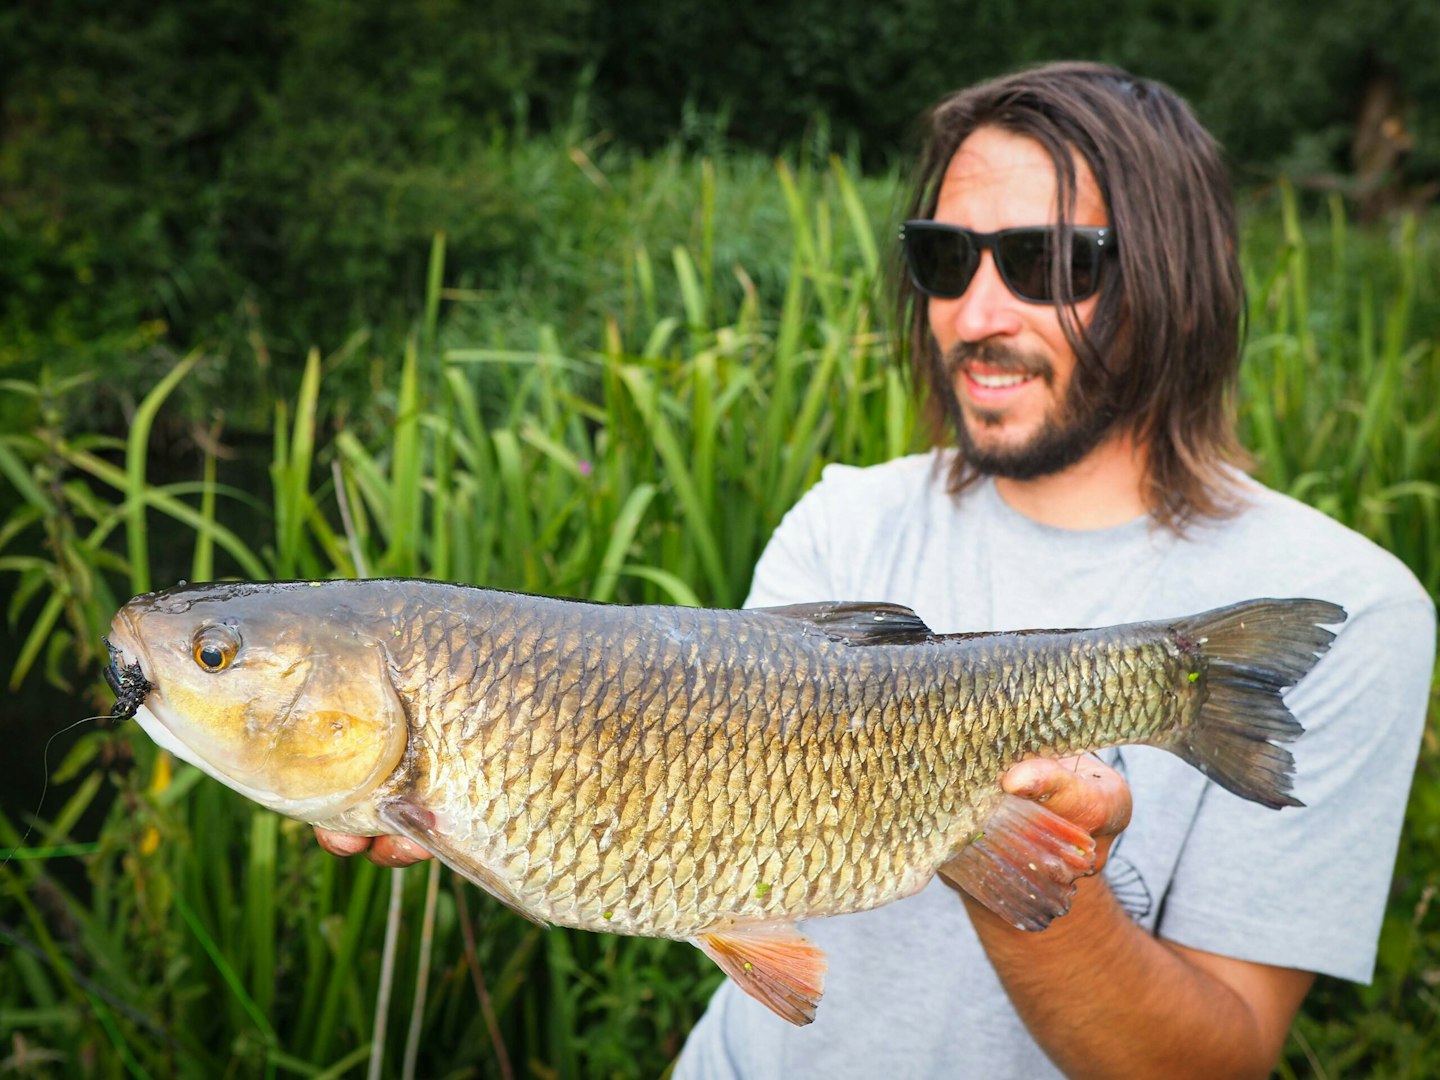 Switching from lures to flies has transformed my late summer chub fishing”  – Robbie Northman